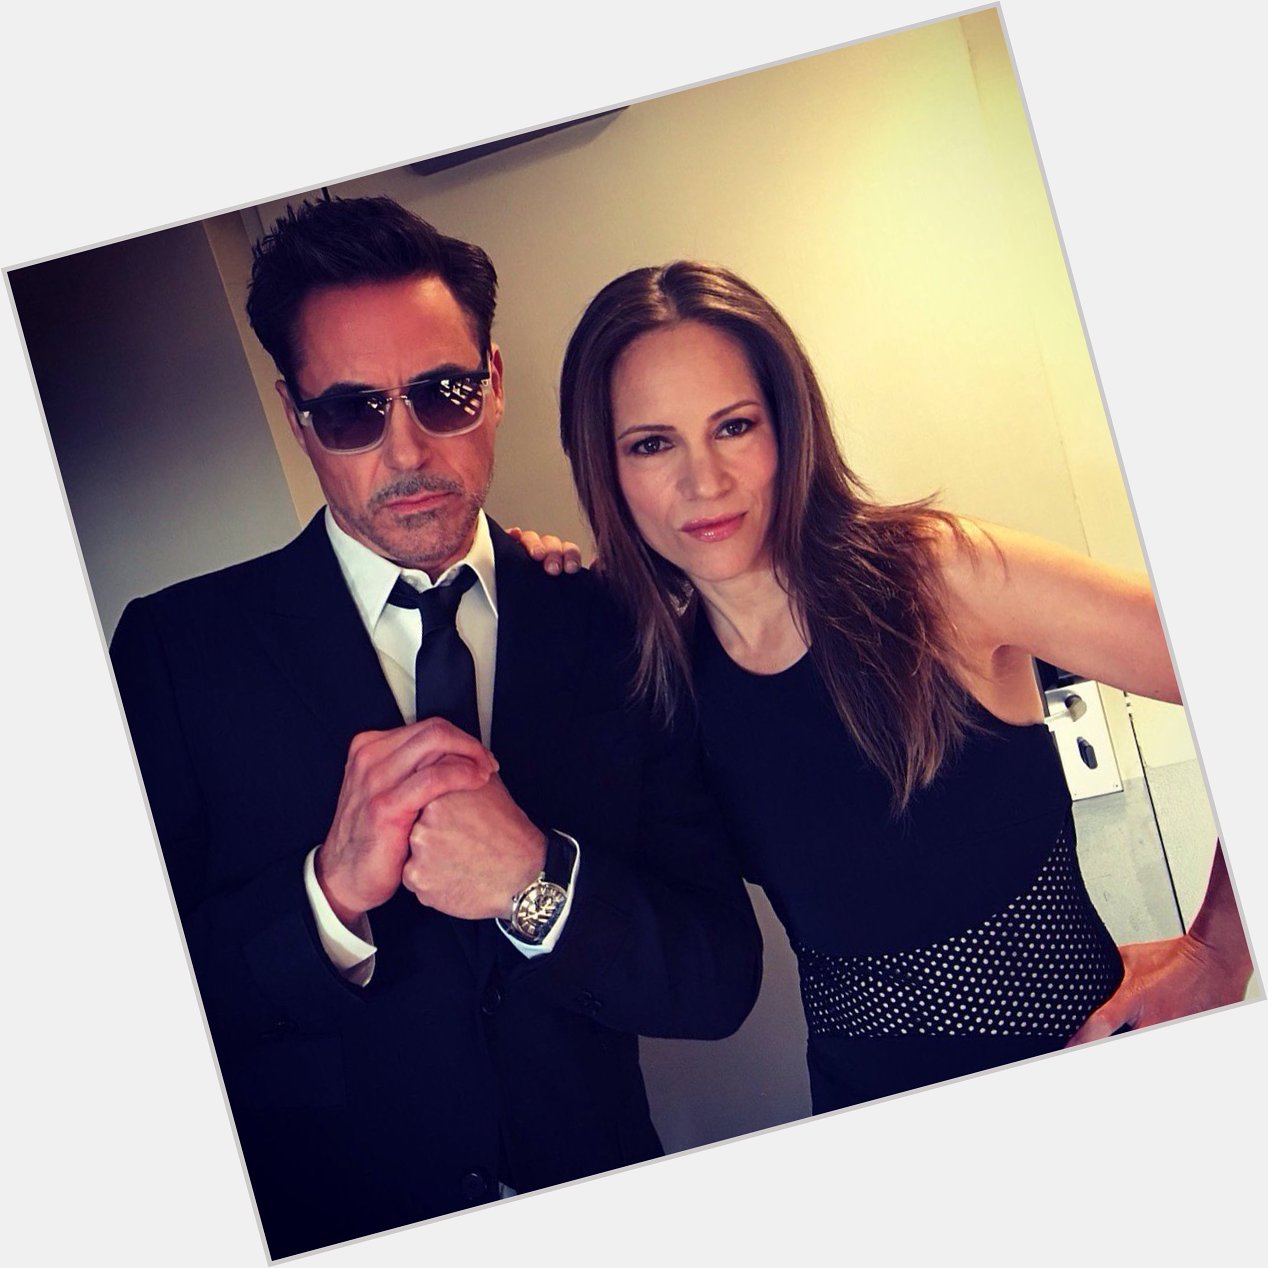 There s a big movie anniversary today but first things first - happy birthday to Susan Downey. 